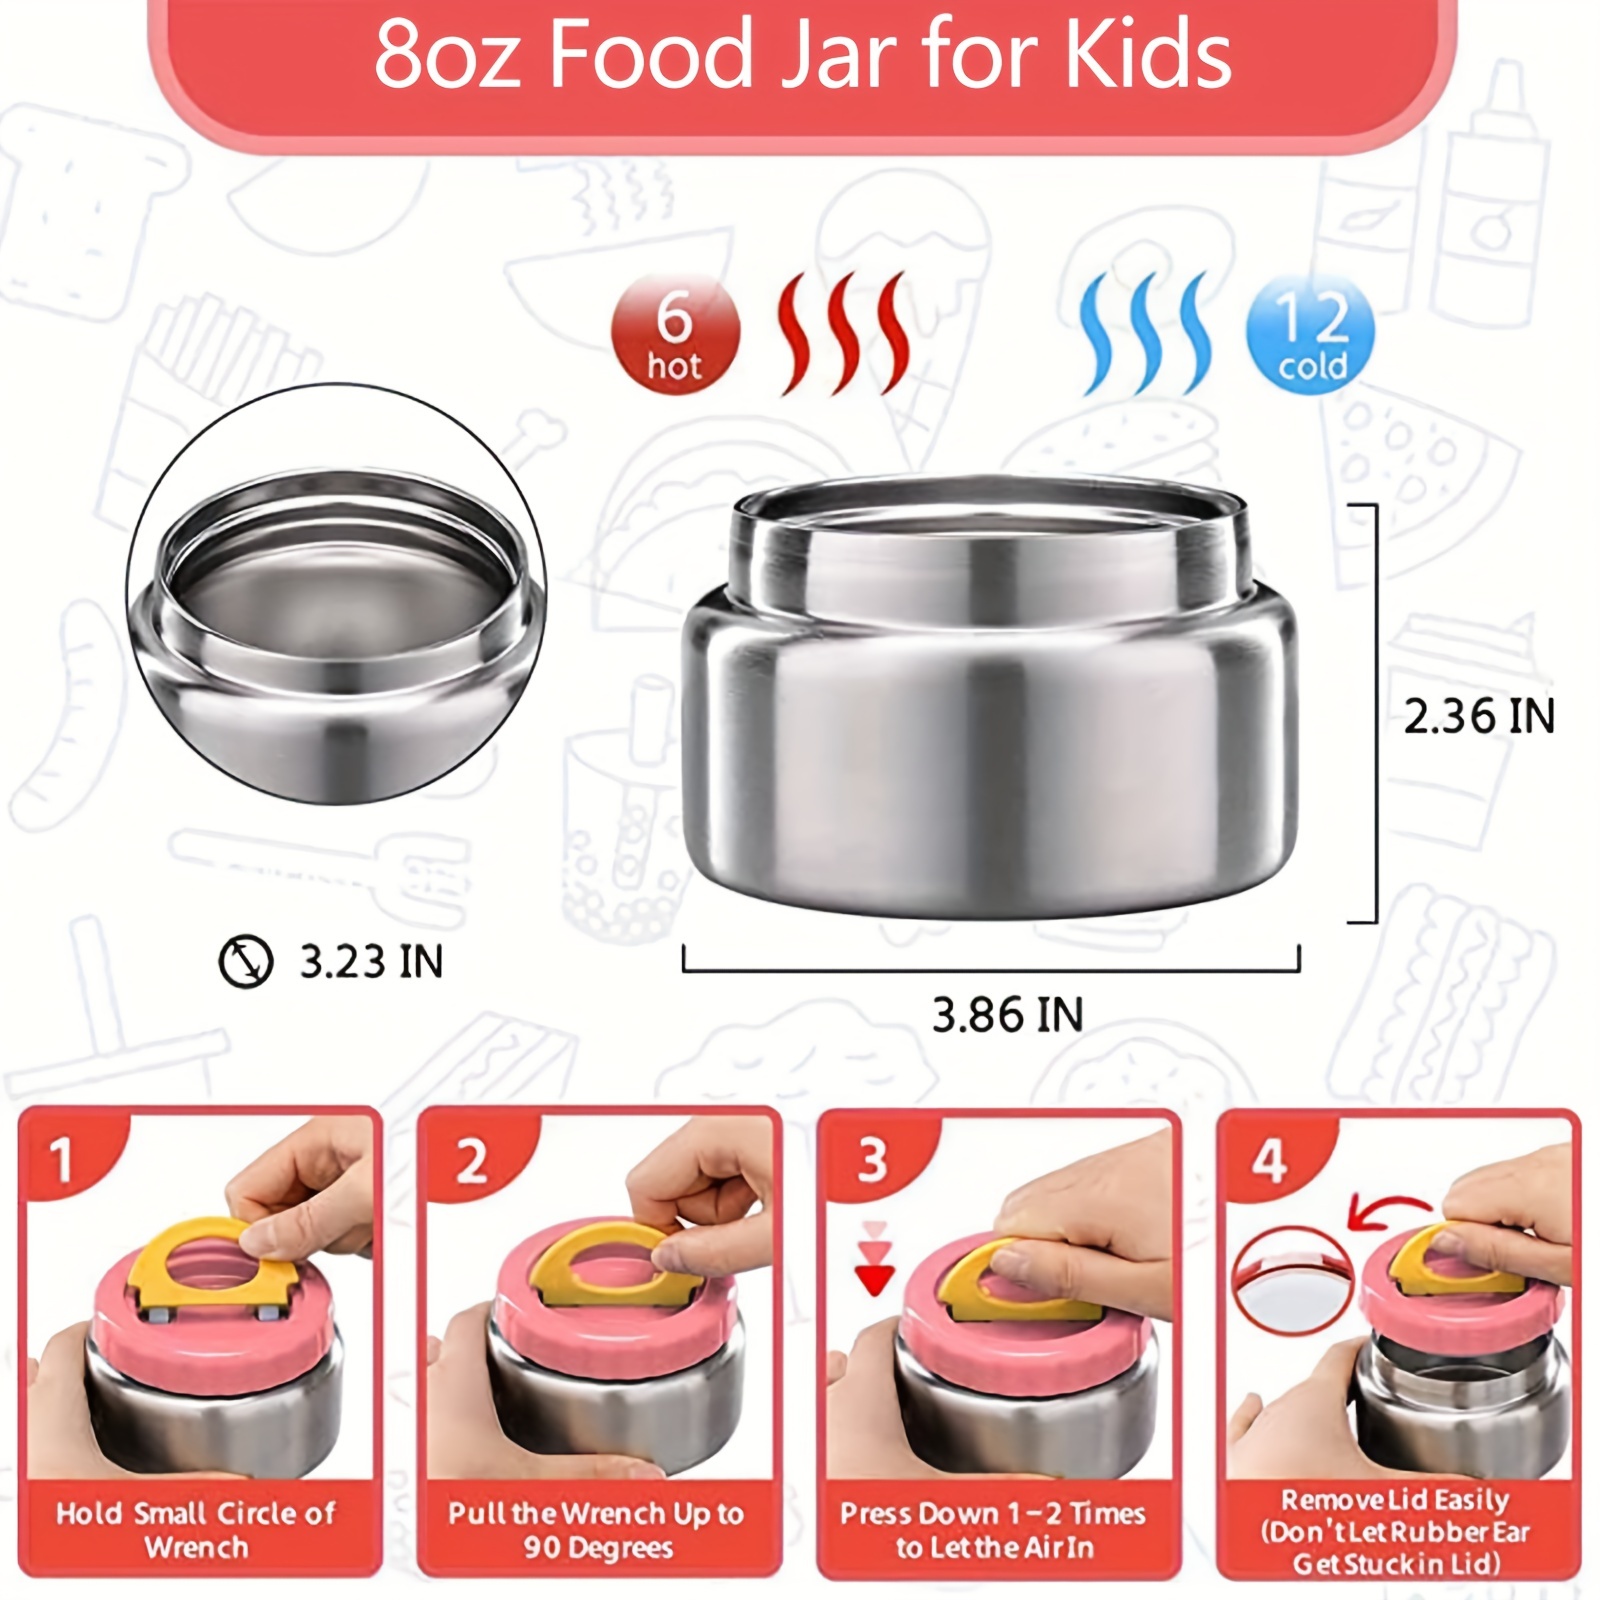 Bento Lunch Box Set With 8oz Soup Thermo, Leak-Proof Lunch